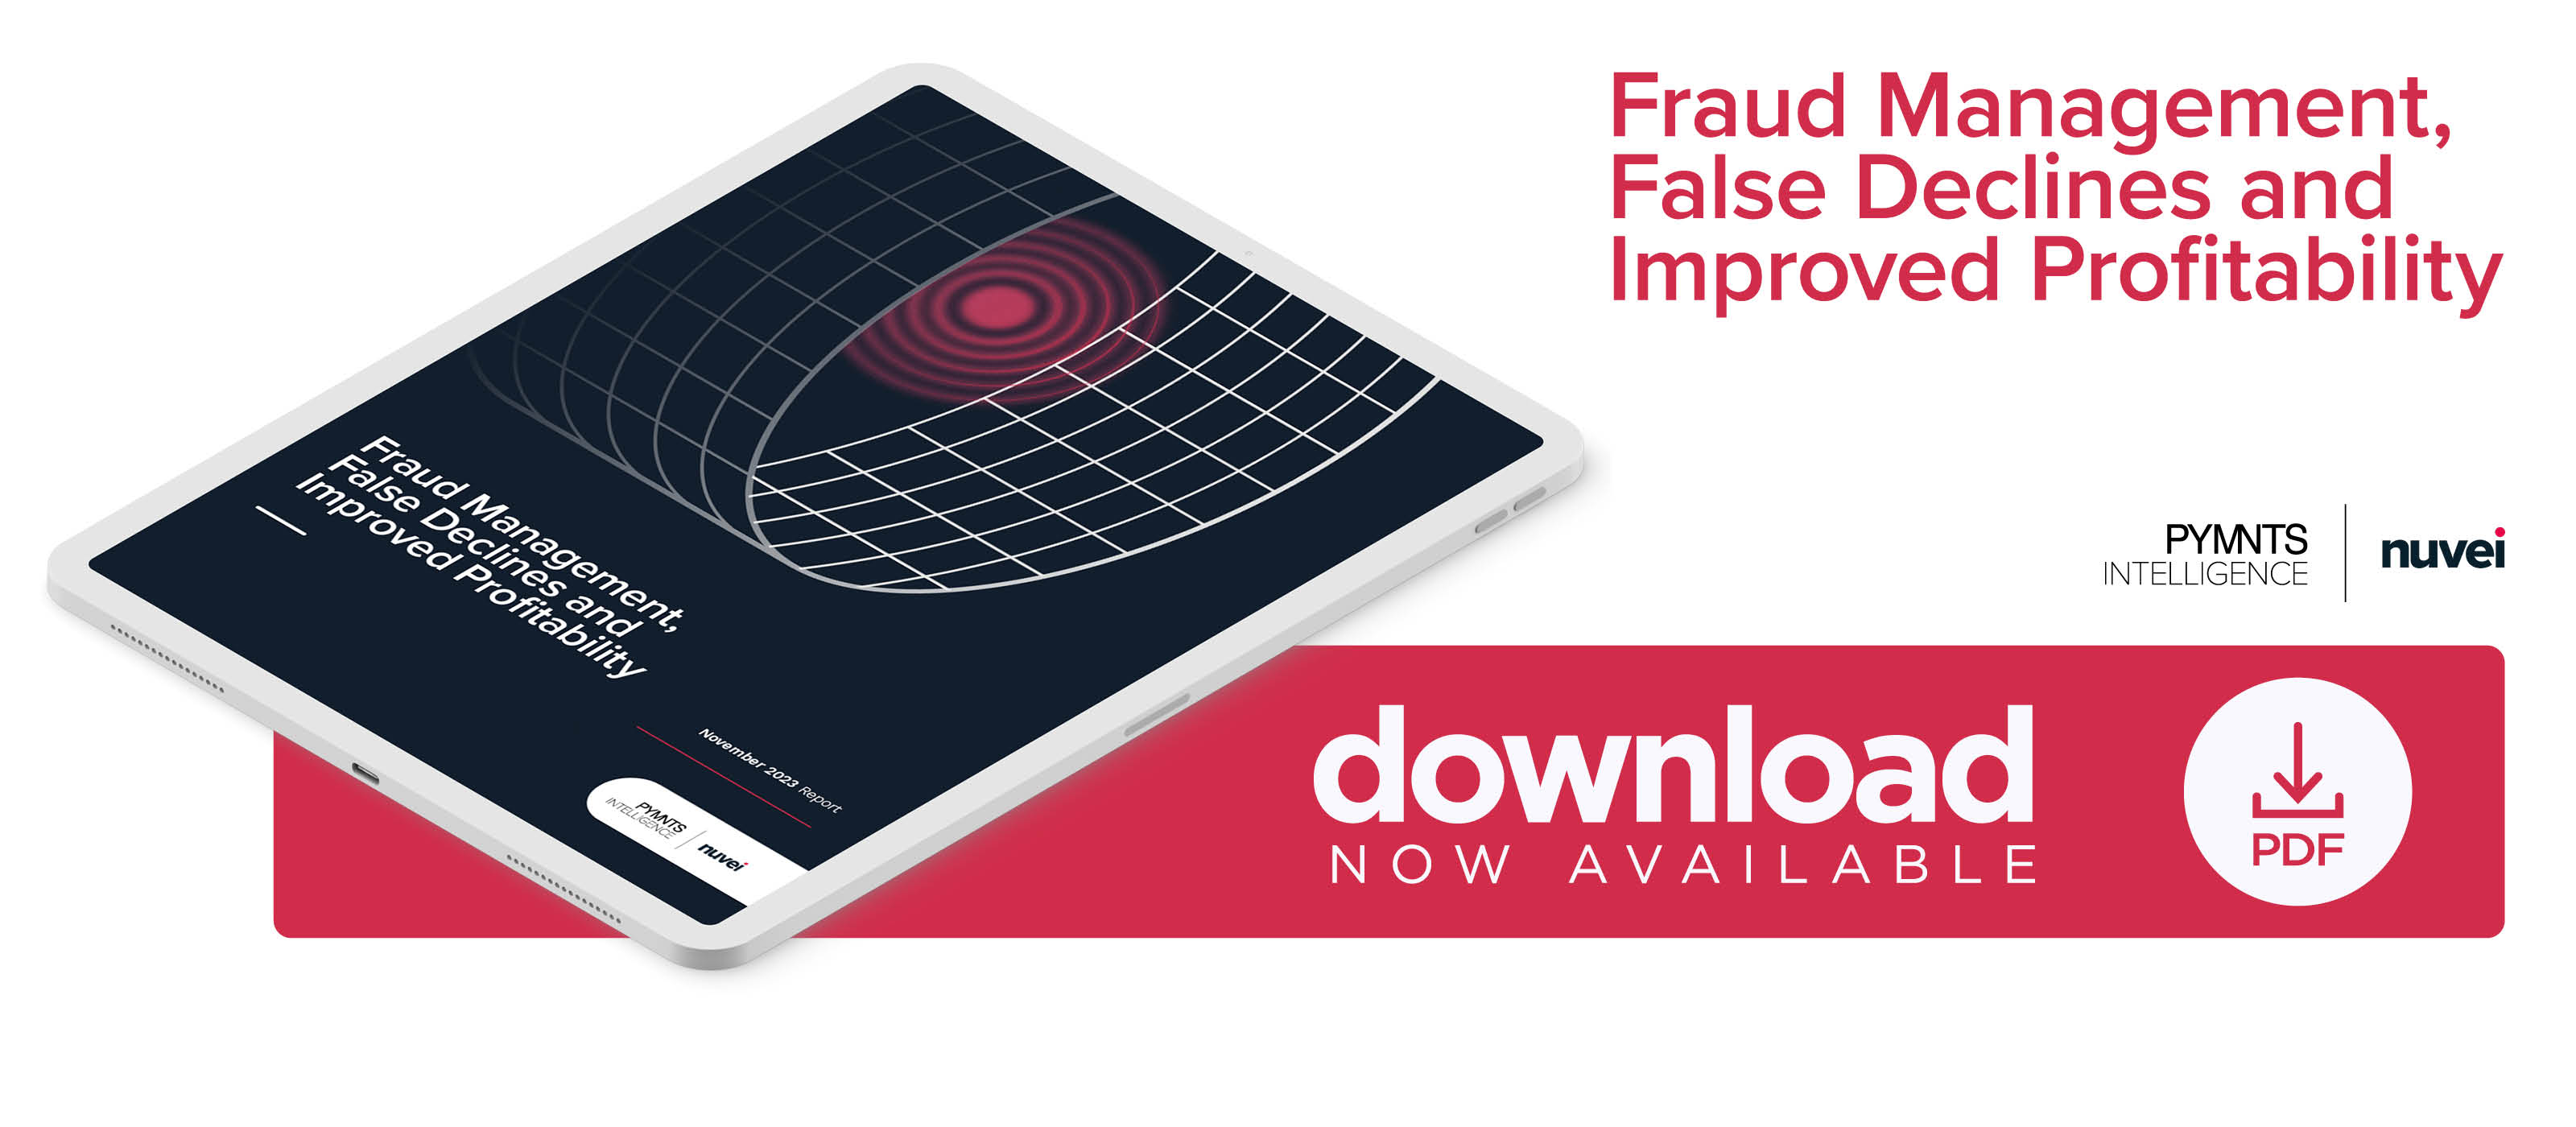 Working with PSPs enables eCommerce firms to prevent fraud, identify the causes of false declines, improve the payment experience and maximize profits.